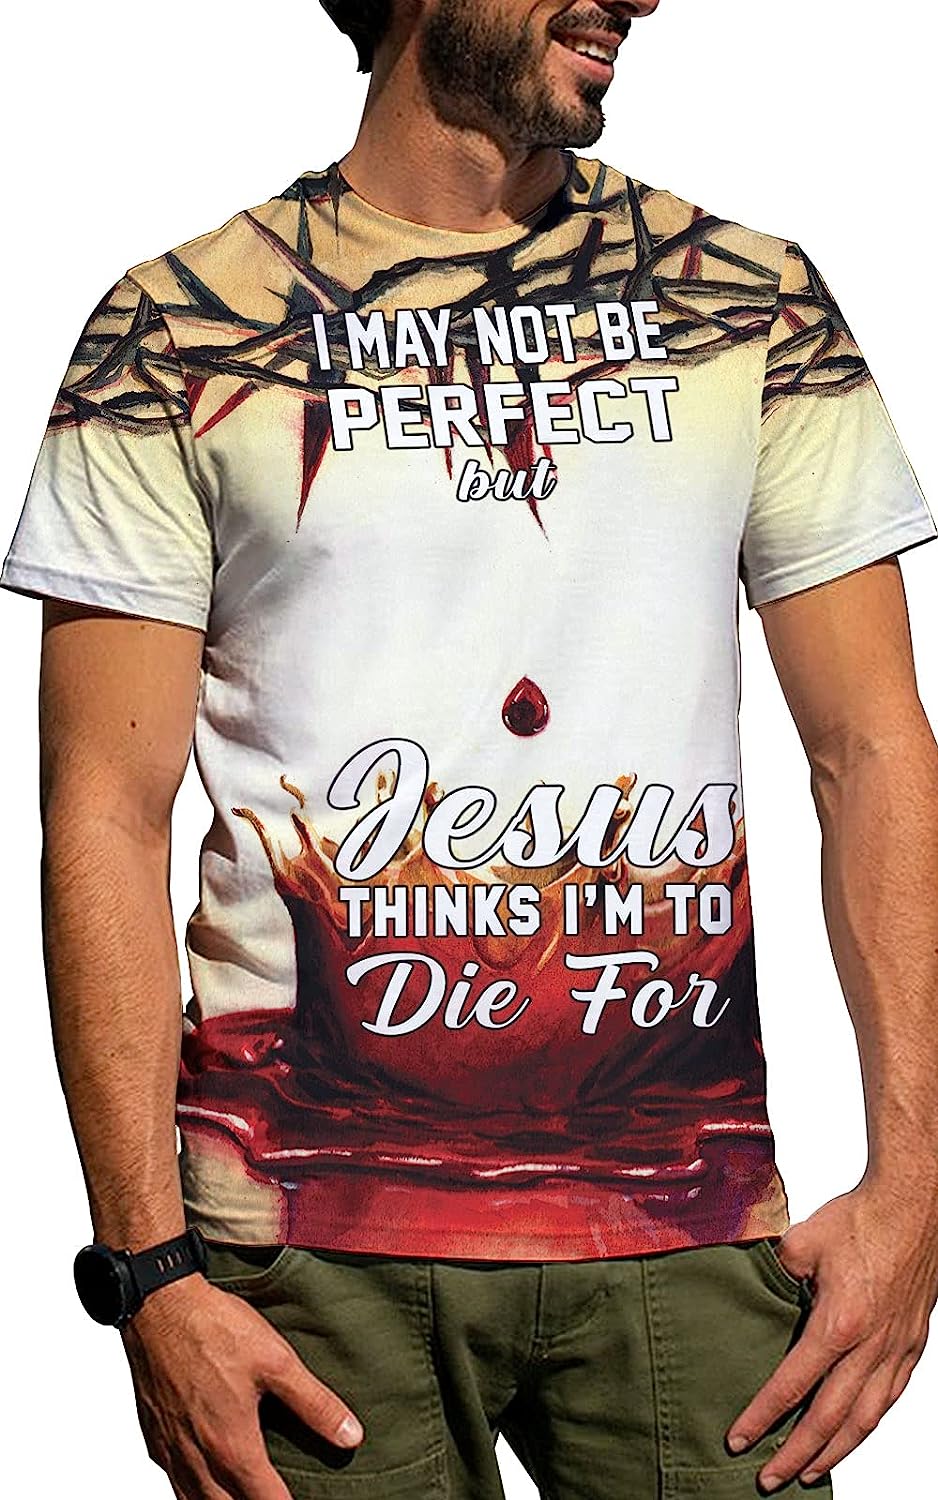 Crown Of Thorns Blood Jesus Think I'm To Die For All Over Printed 3D T Shirt - Christian Shirts for Men Women